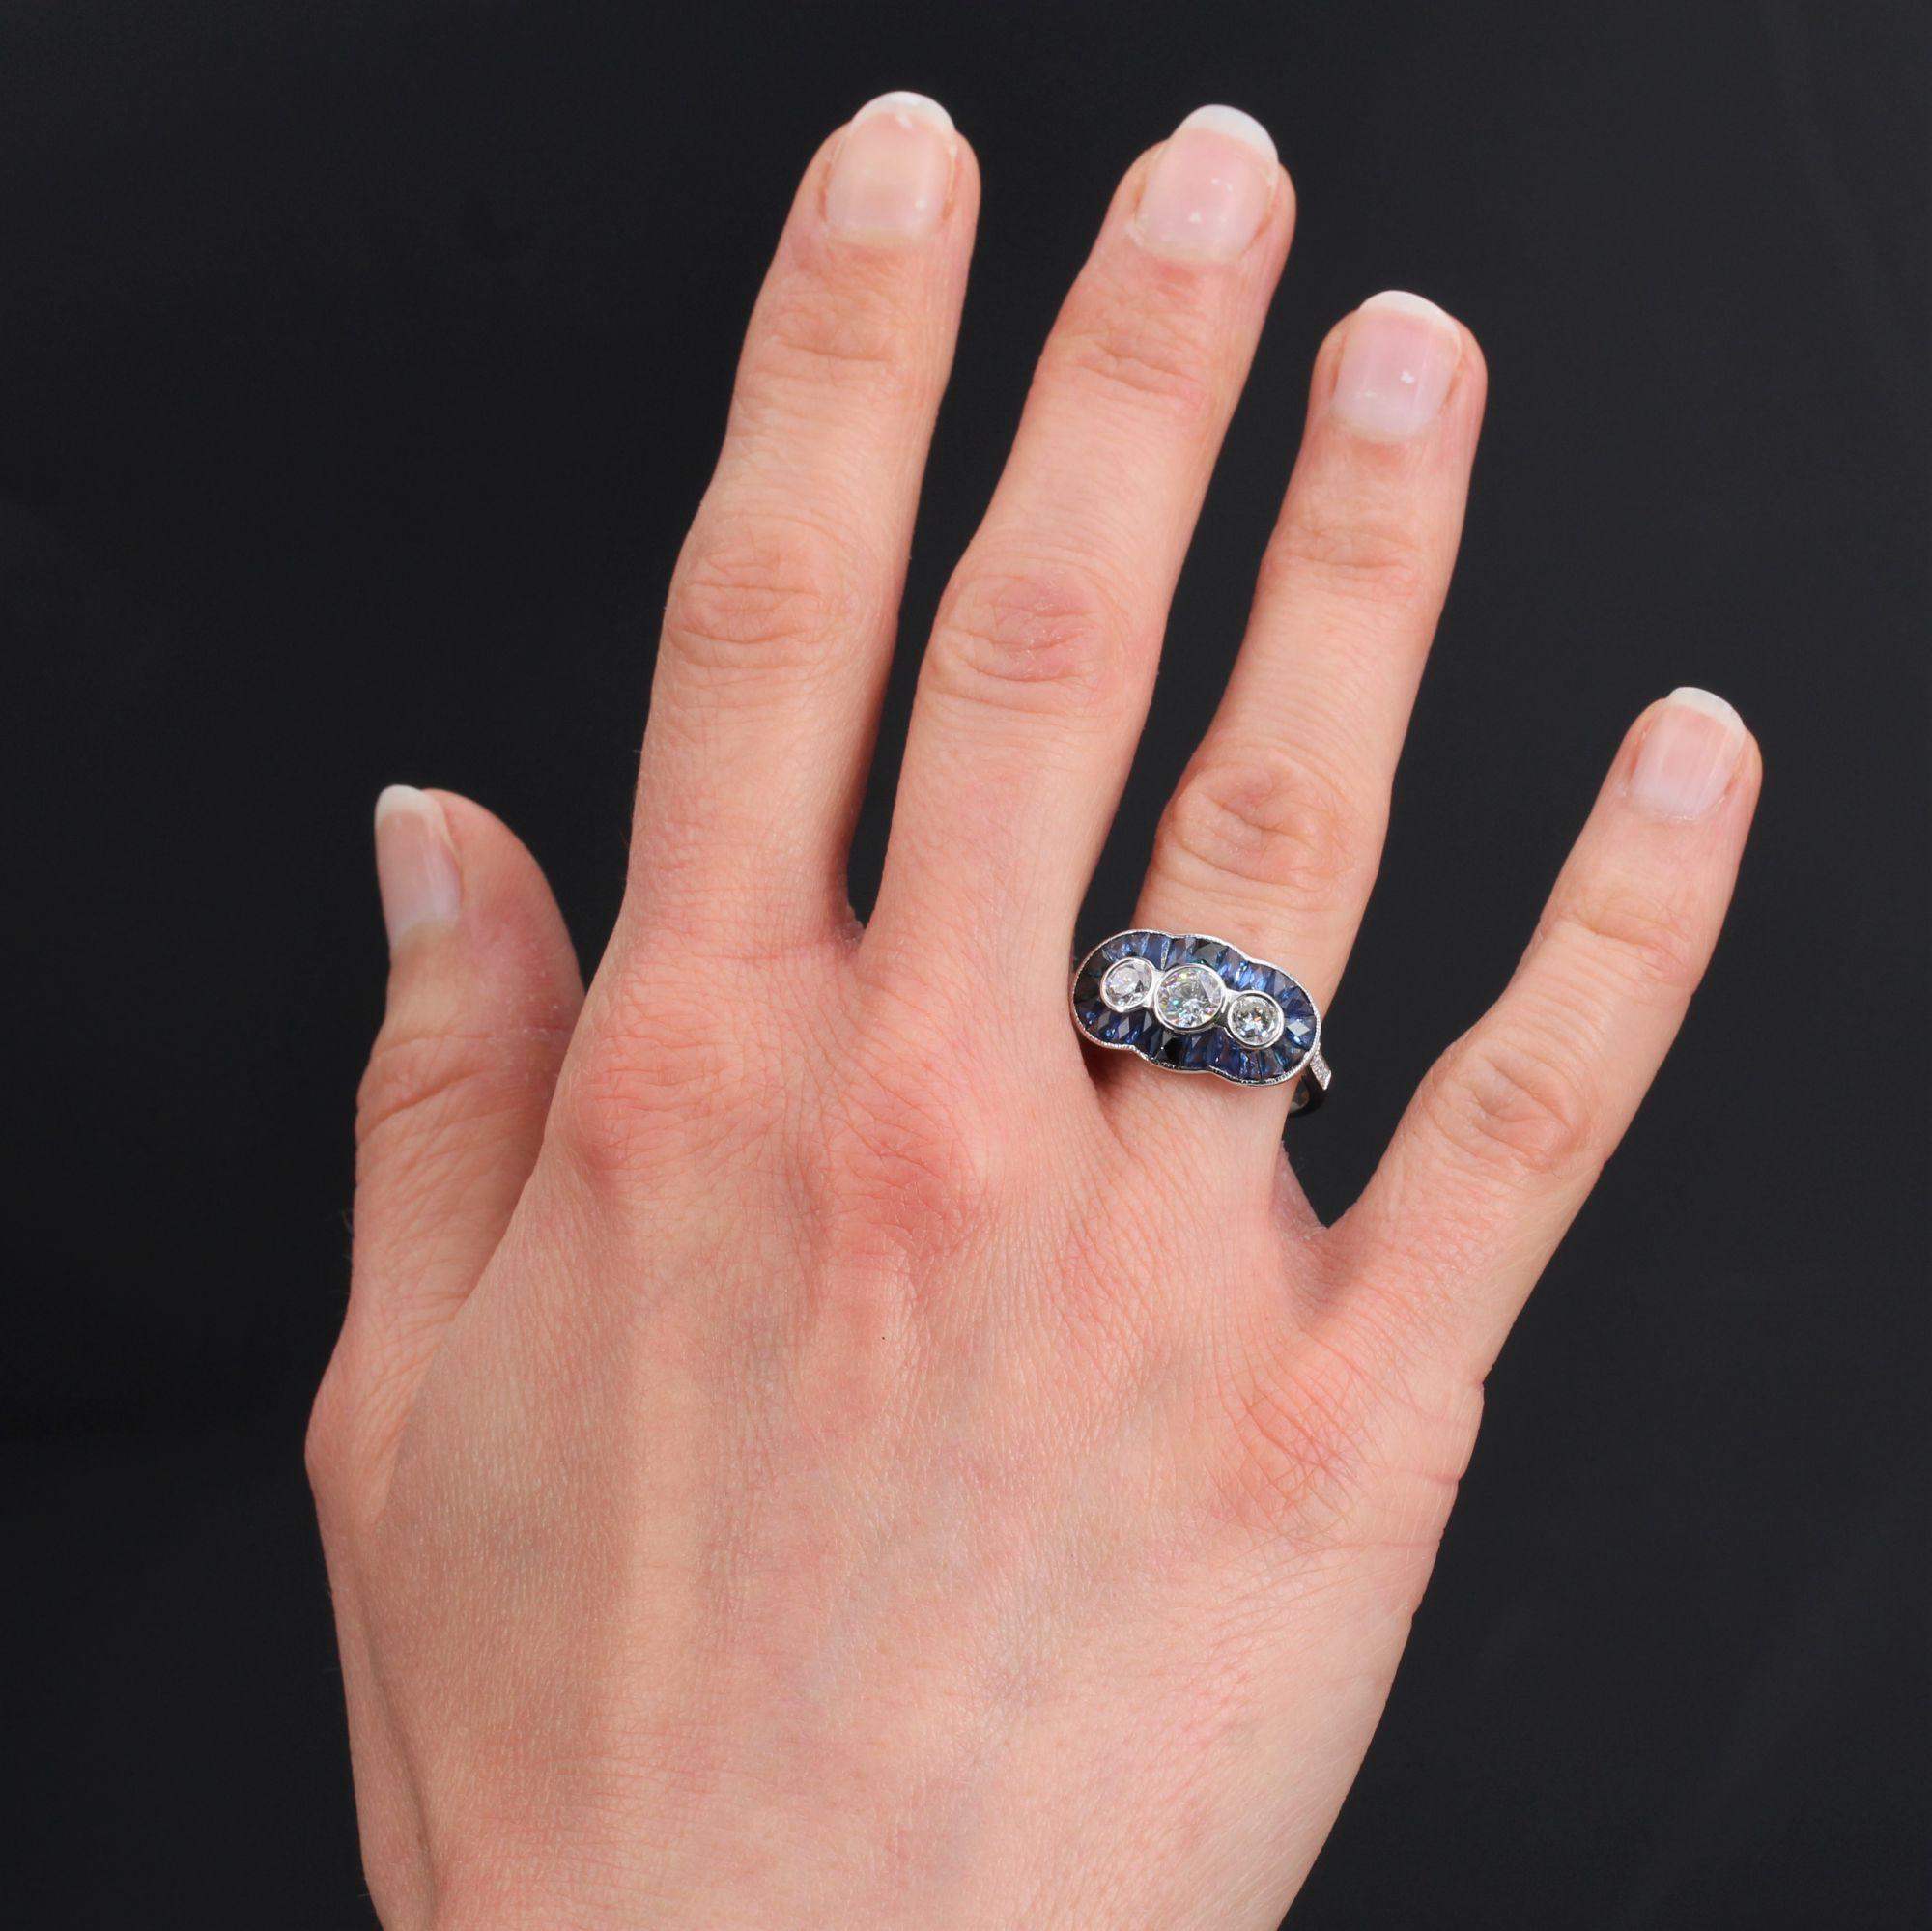 Ring in 18 karat white gold, eagle head hallmark.
A lovely modern Art Deco style ring, it is set with three modern brilliant-cut diamonds in a poly-lobed setting of calibrated sapphires on top. On either side, on the start of the ring are set 2x4